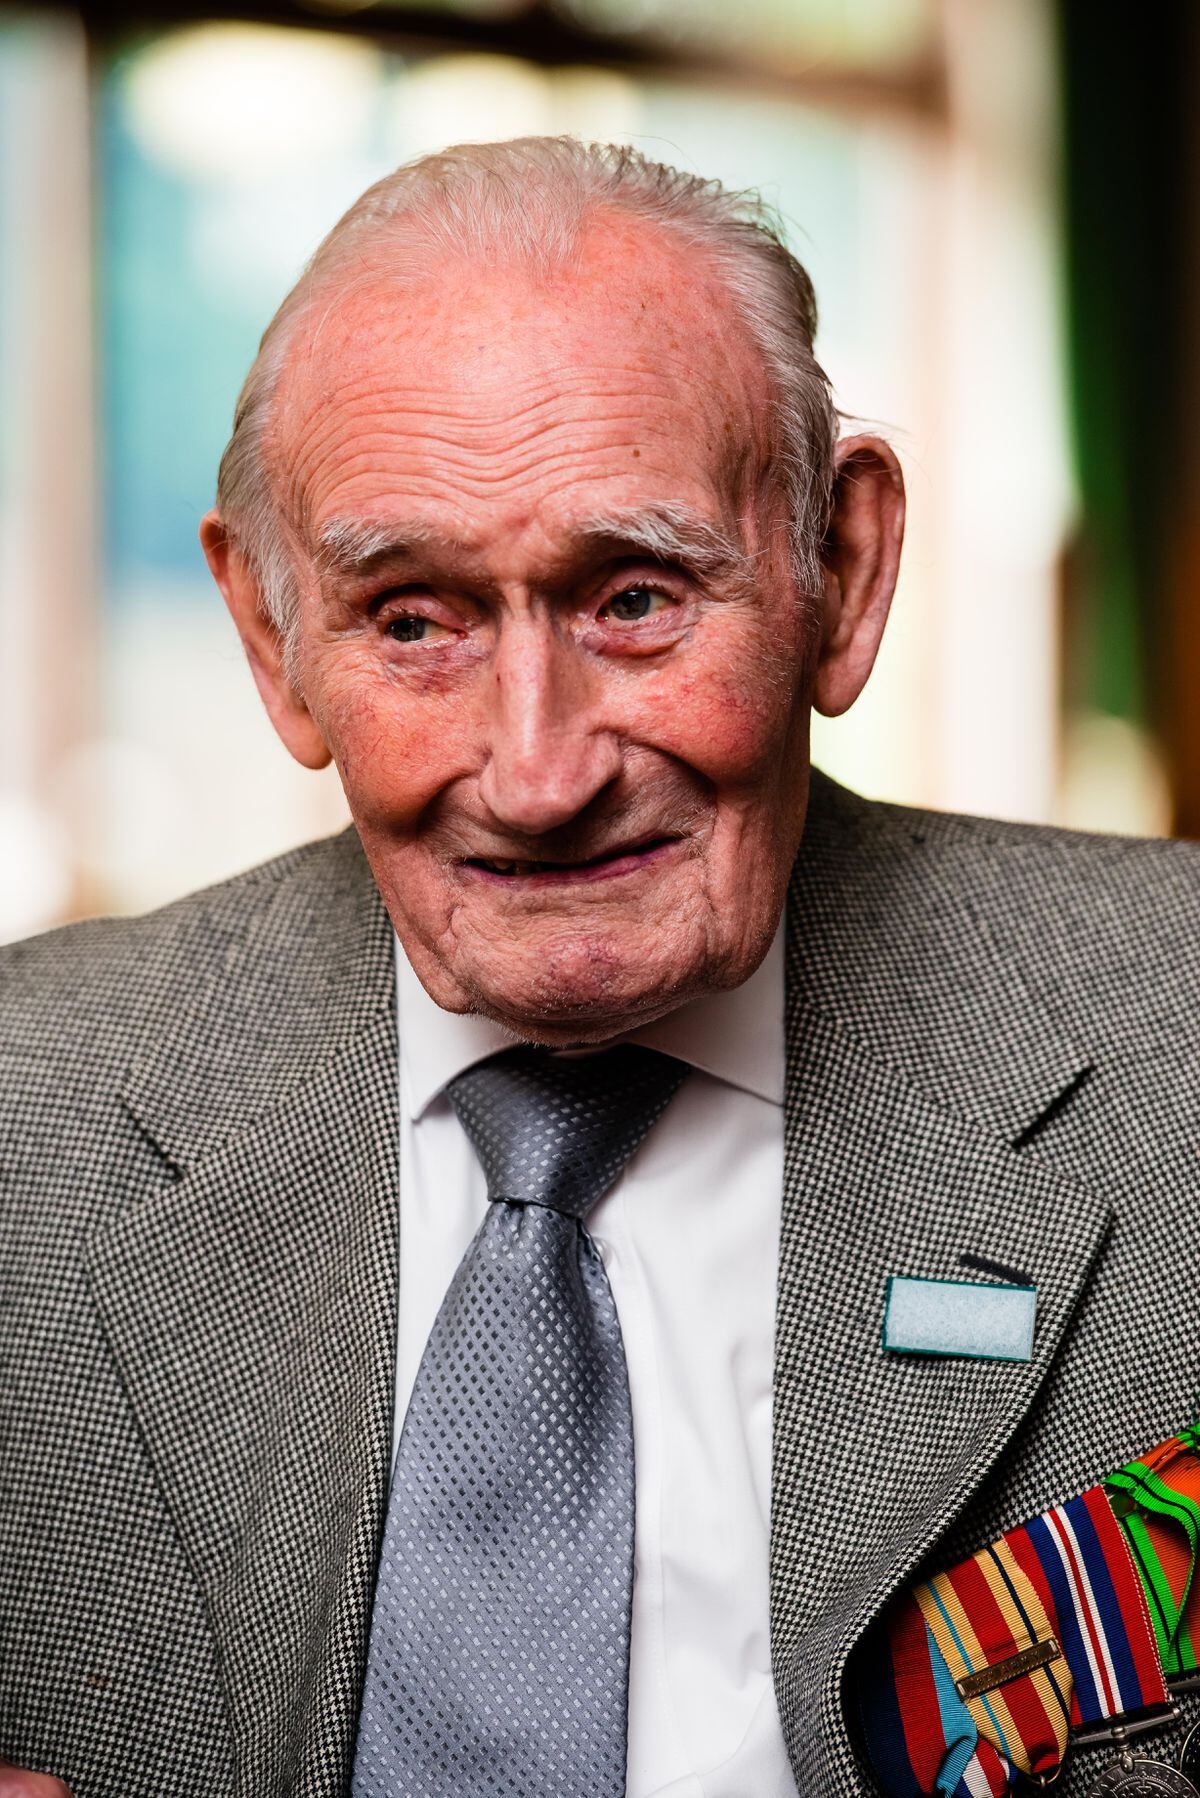 Mr Bray, aged 97, at the presentation on Wednesday